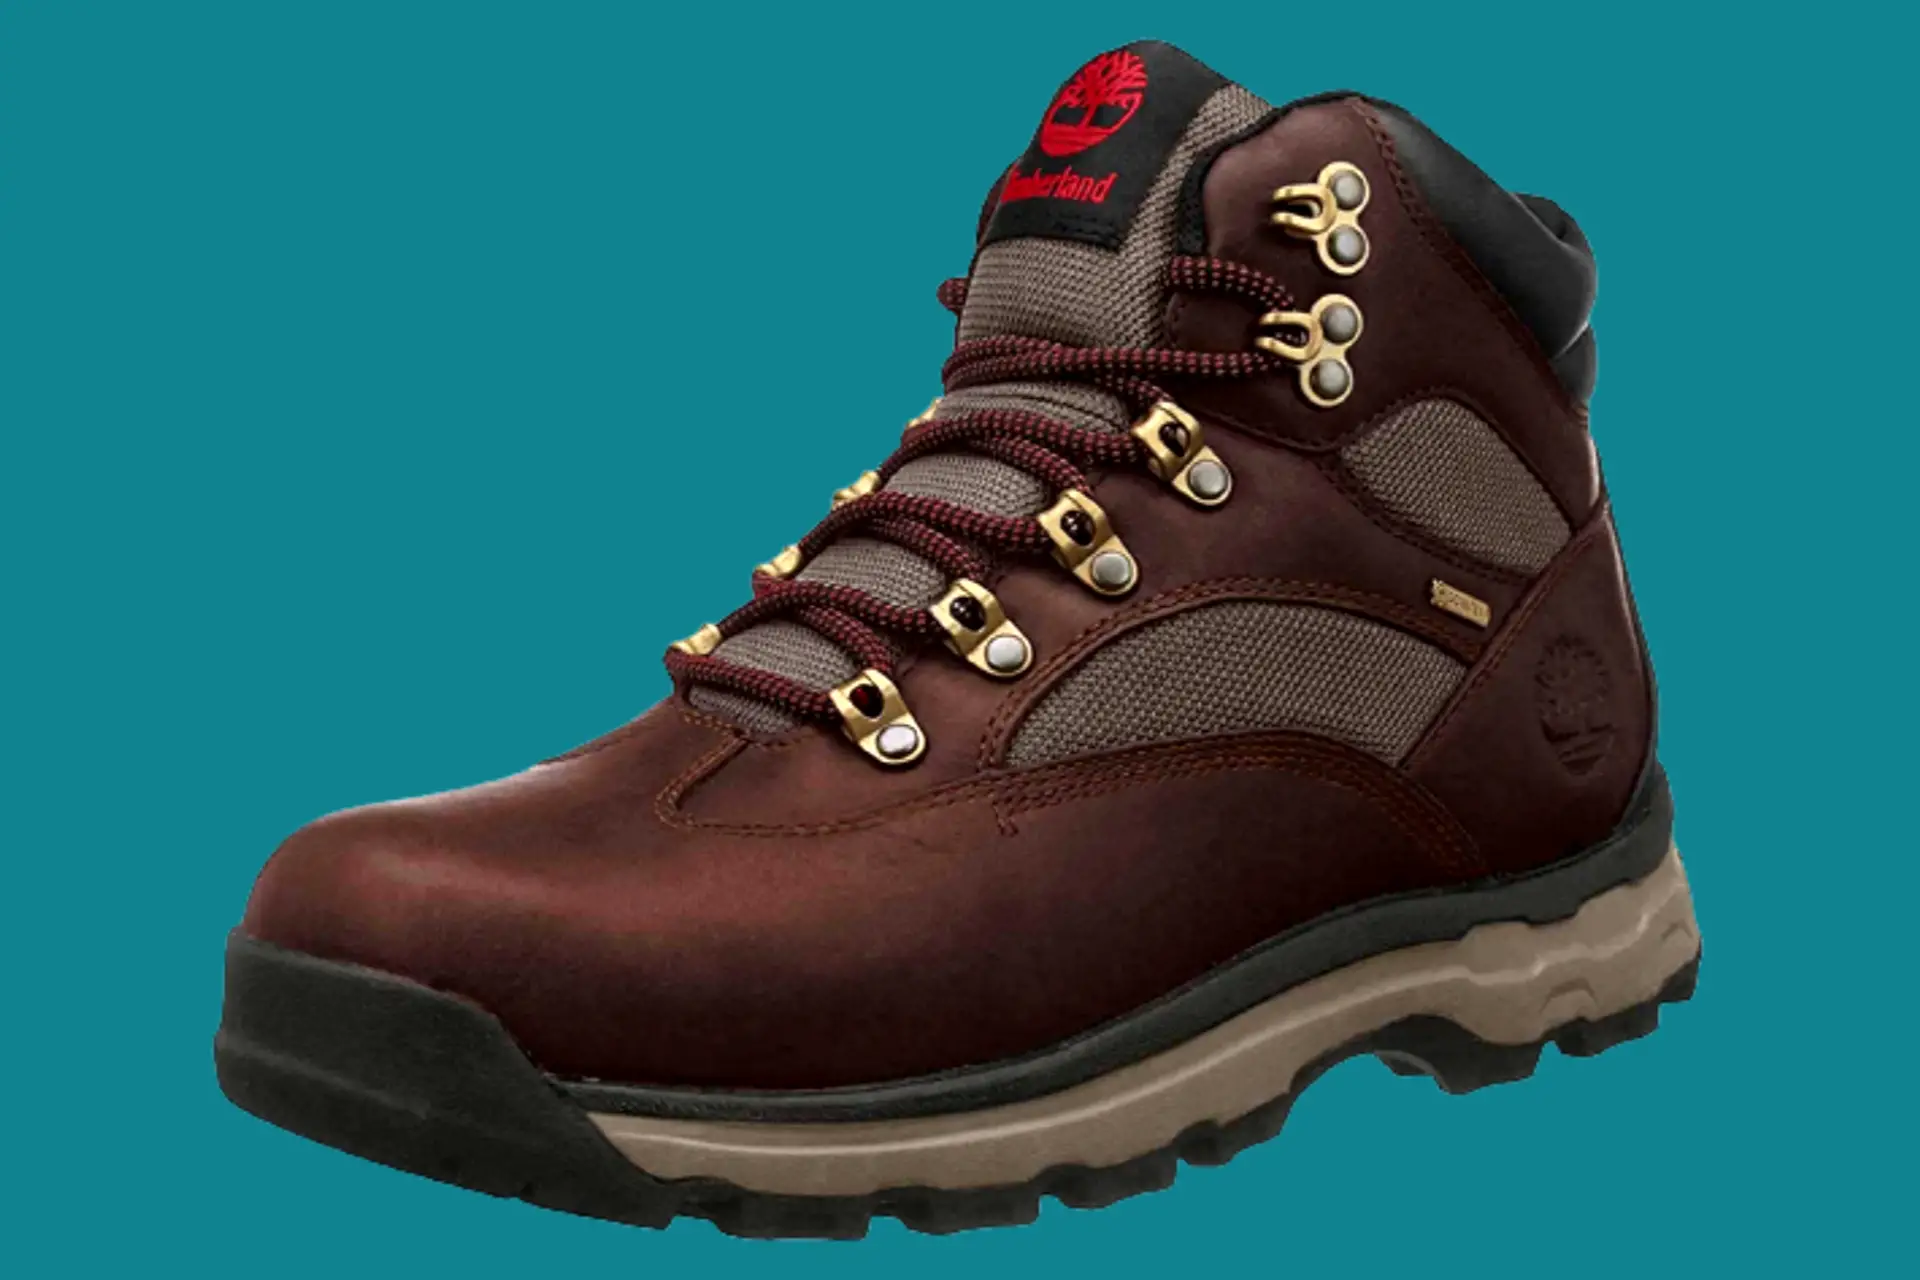 Top-rated Timberland boots for hiking